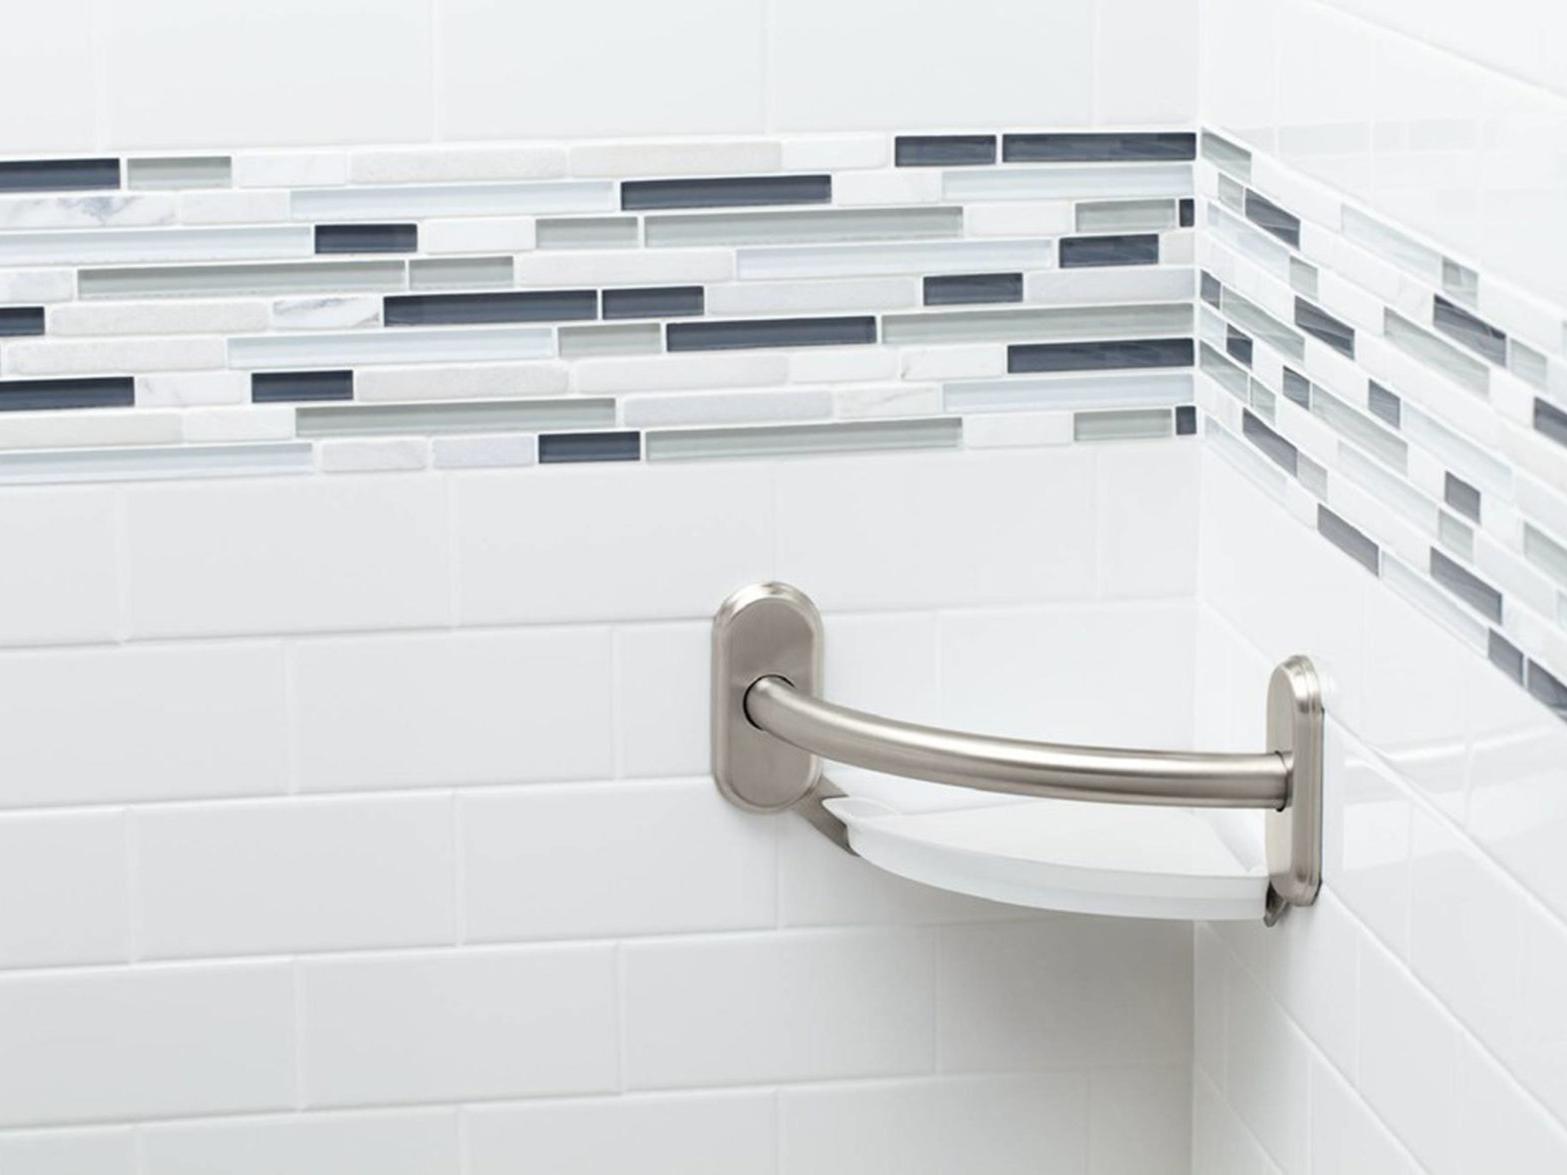 How Much Does Bathroom Tile Repair Cost, How To Fix Bathroom Tile